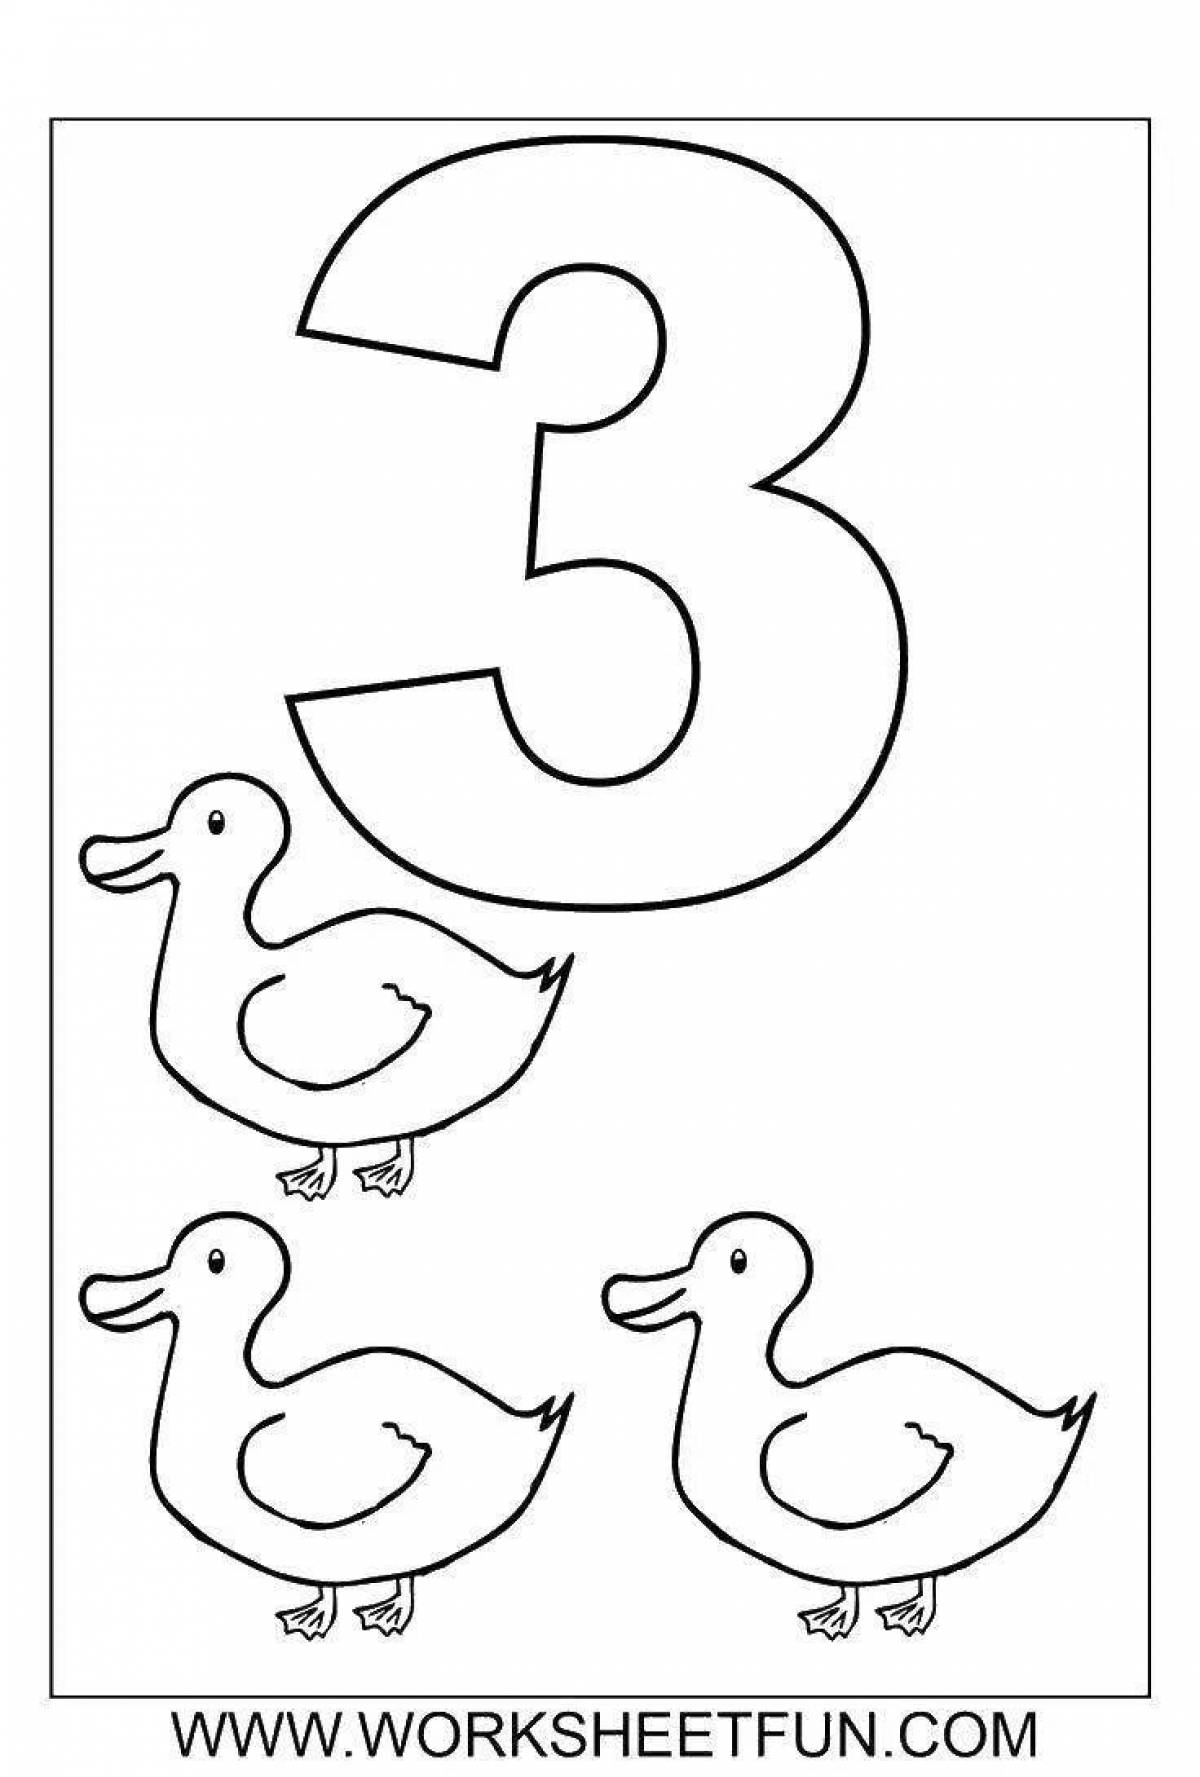 Amazing number three coloring page